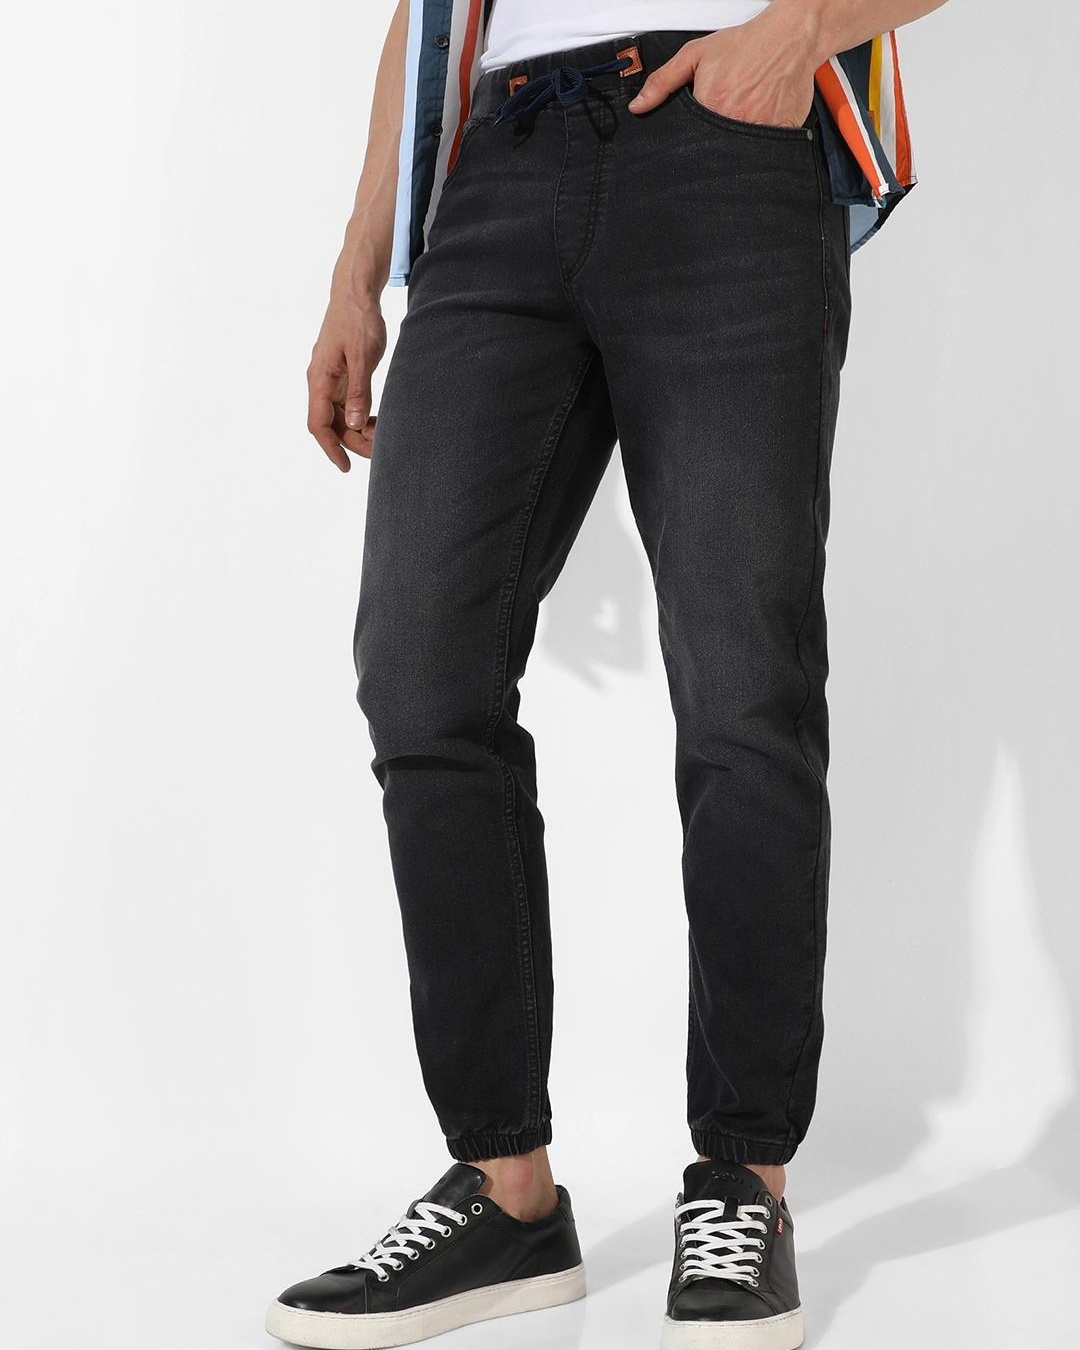 Men's Black Washed Jeans paired with loafers